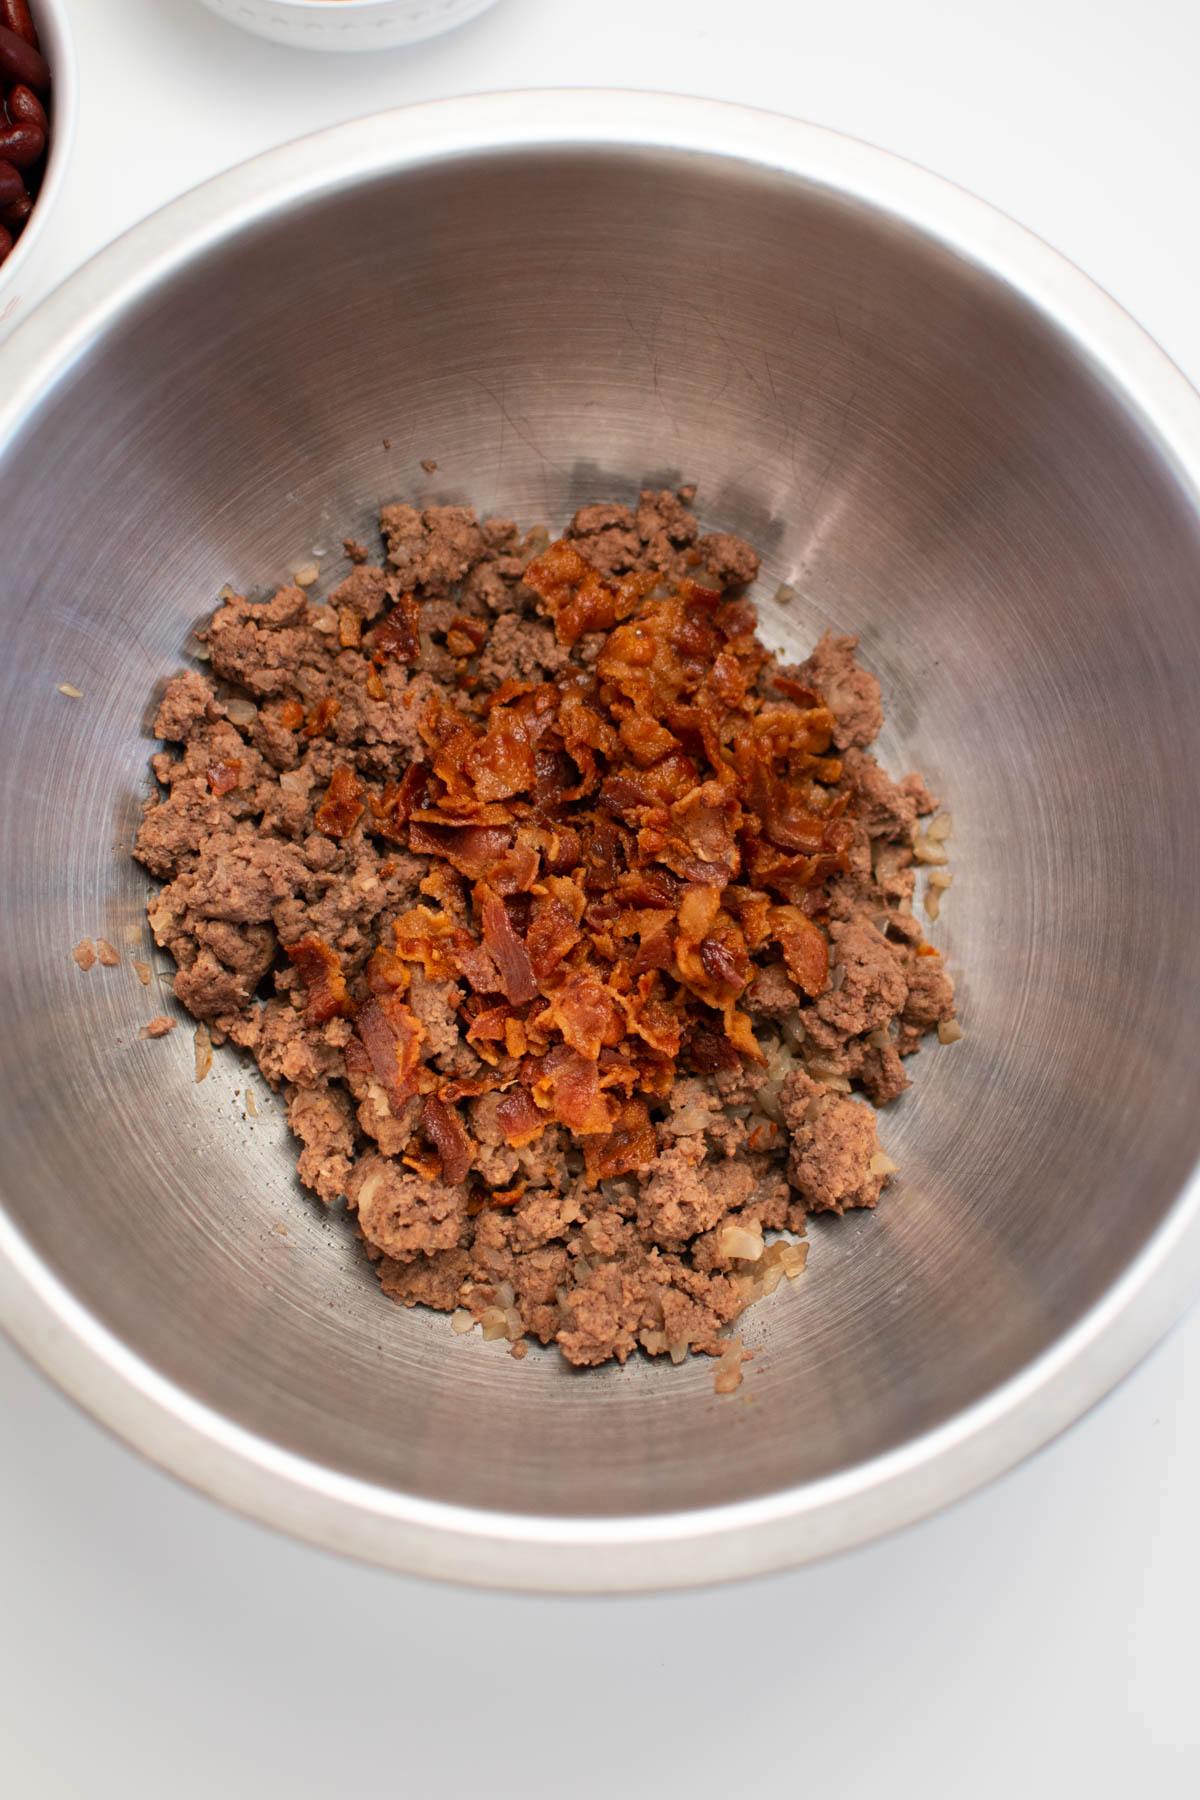 Ground beef and crumbled bacon in metal mixing bowl.